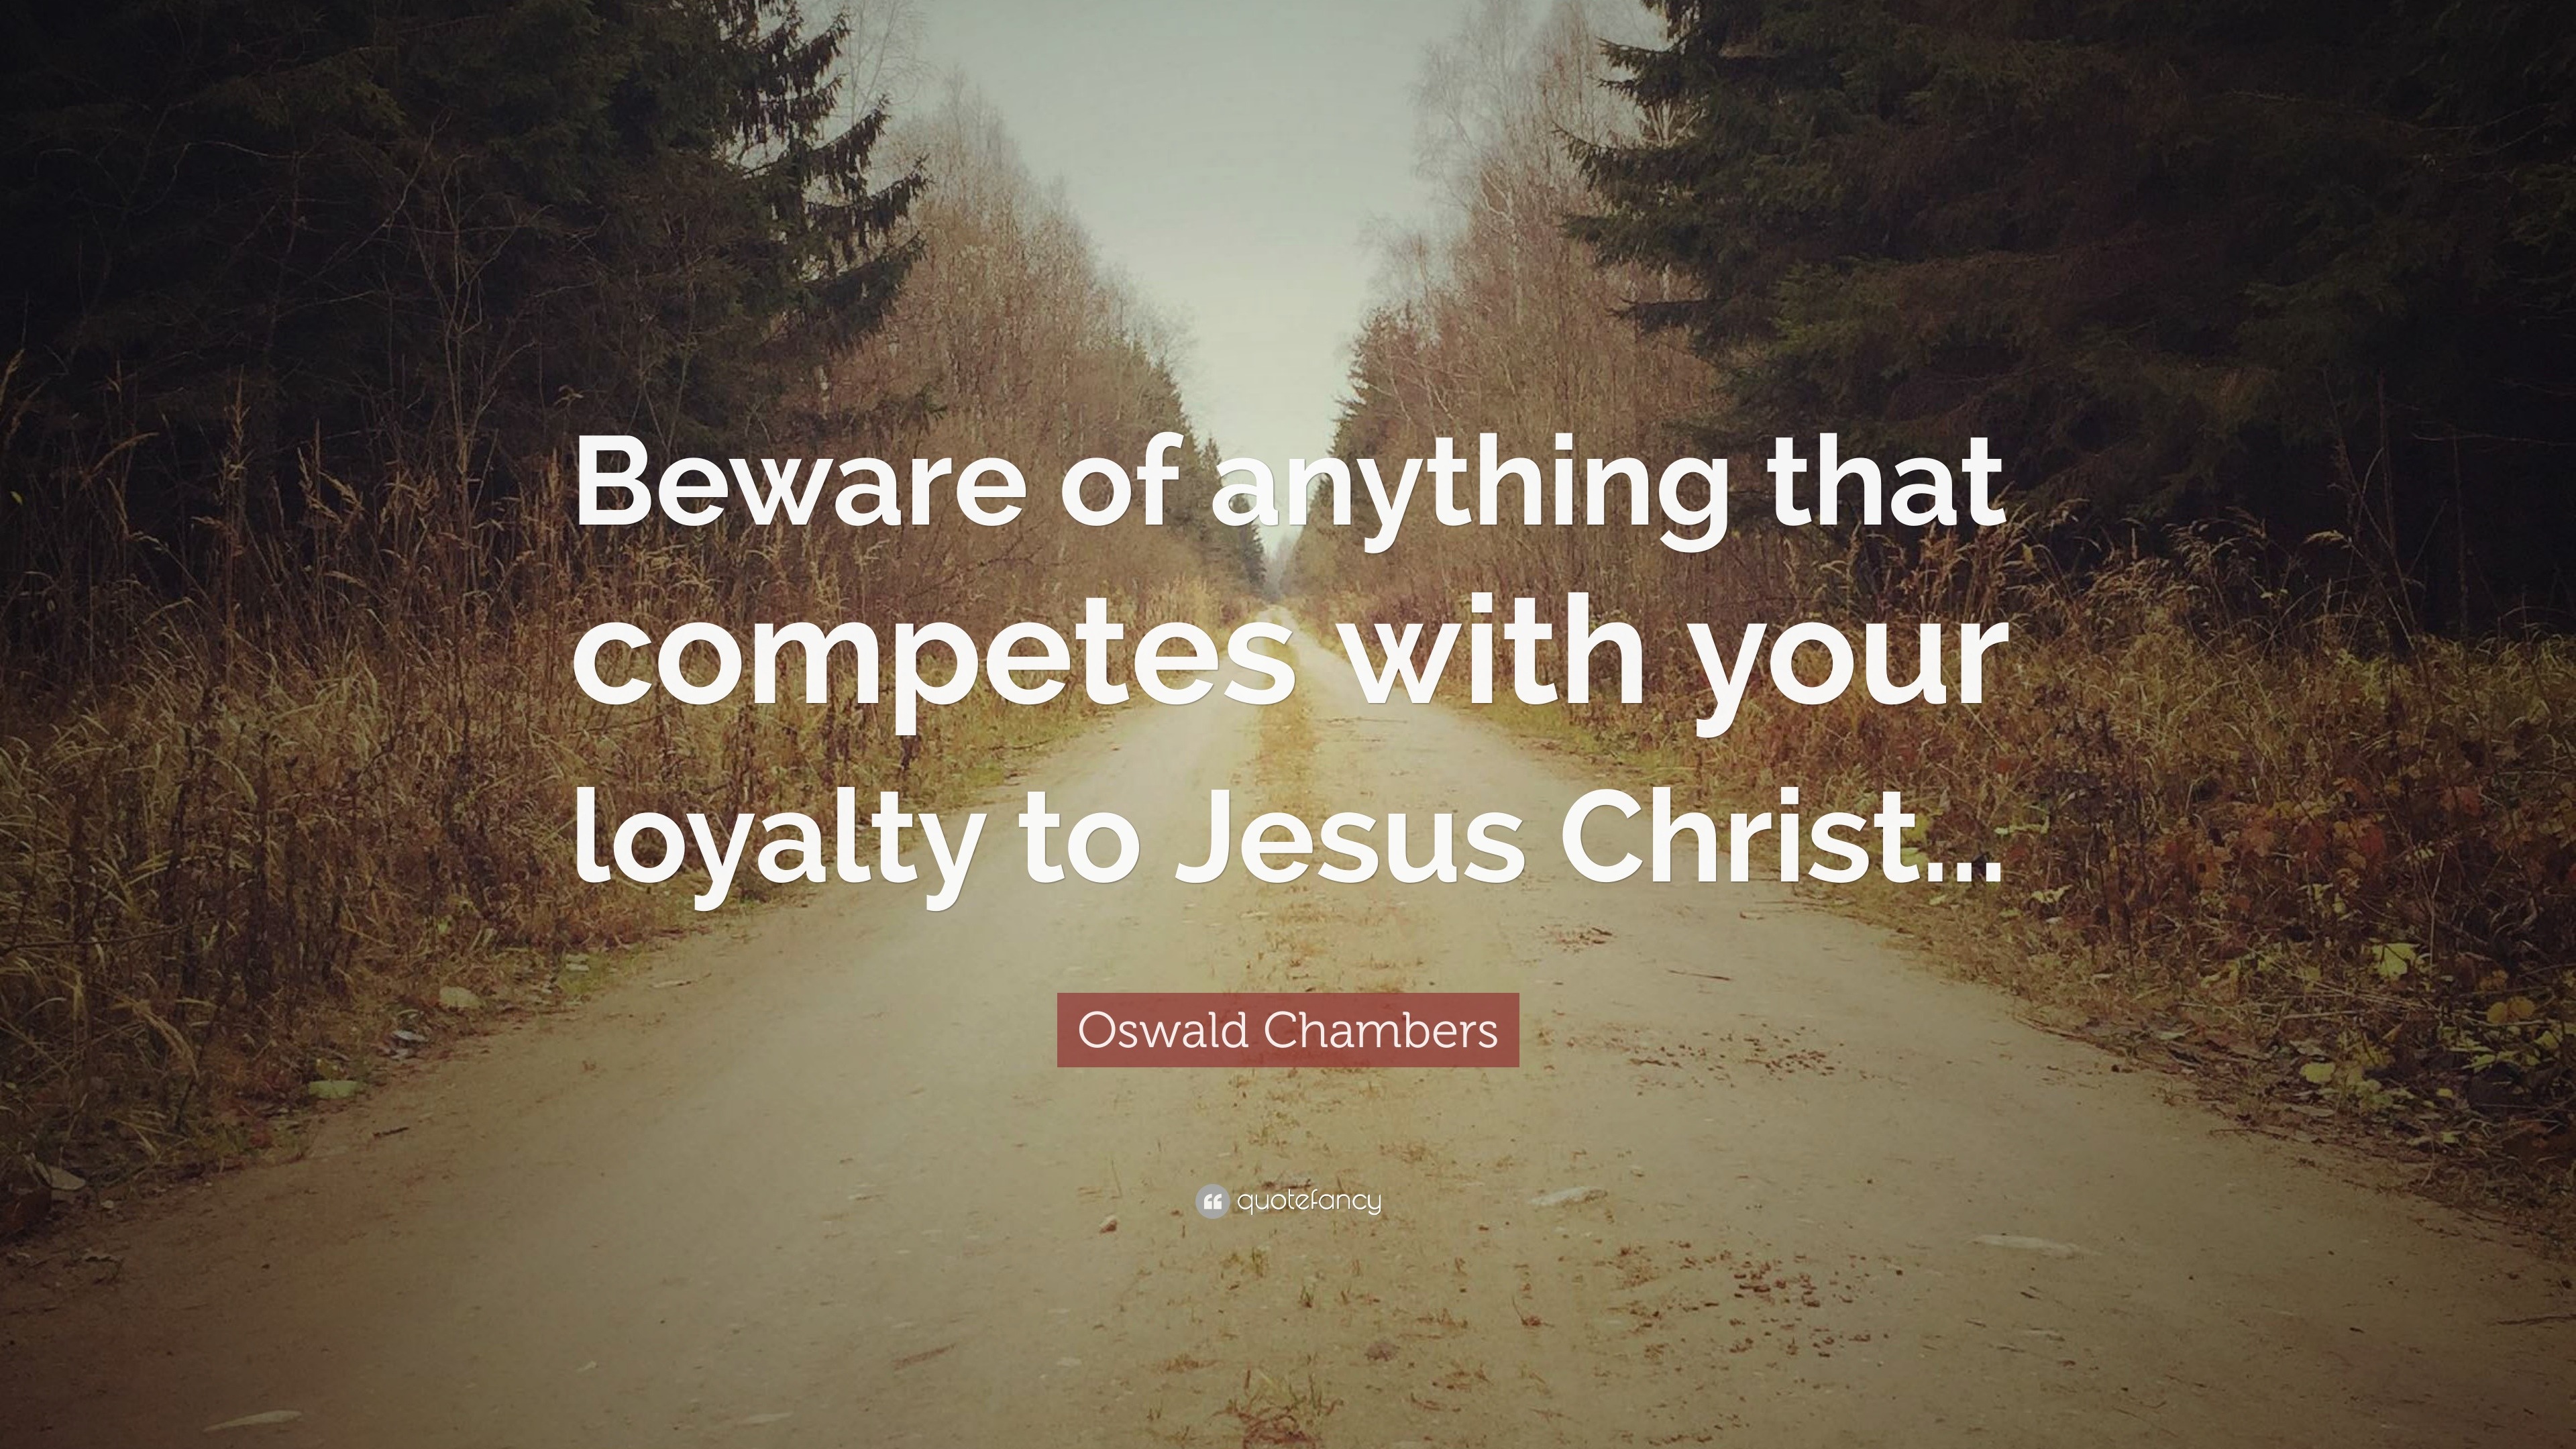 Oswald Chambers Quote: “Beware of anything that competes with your